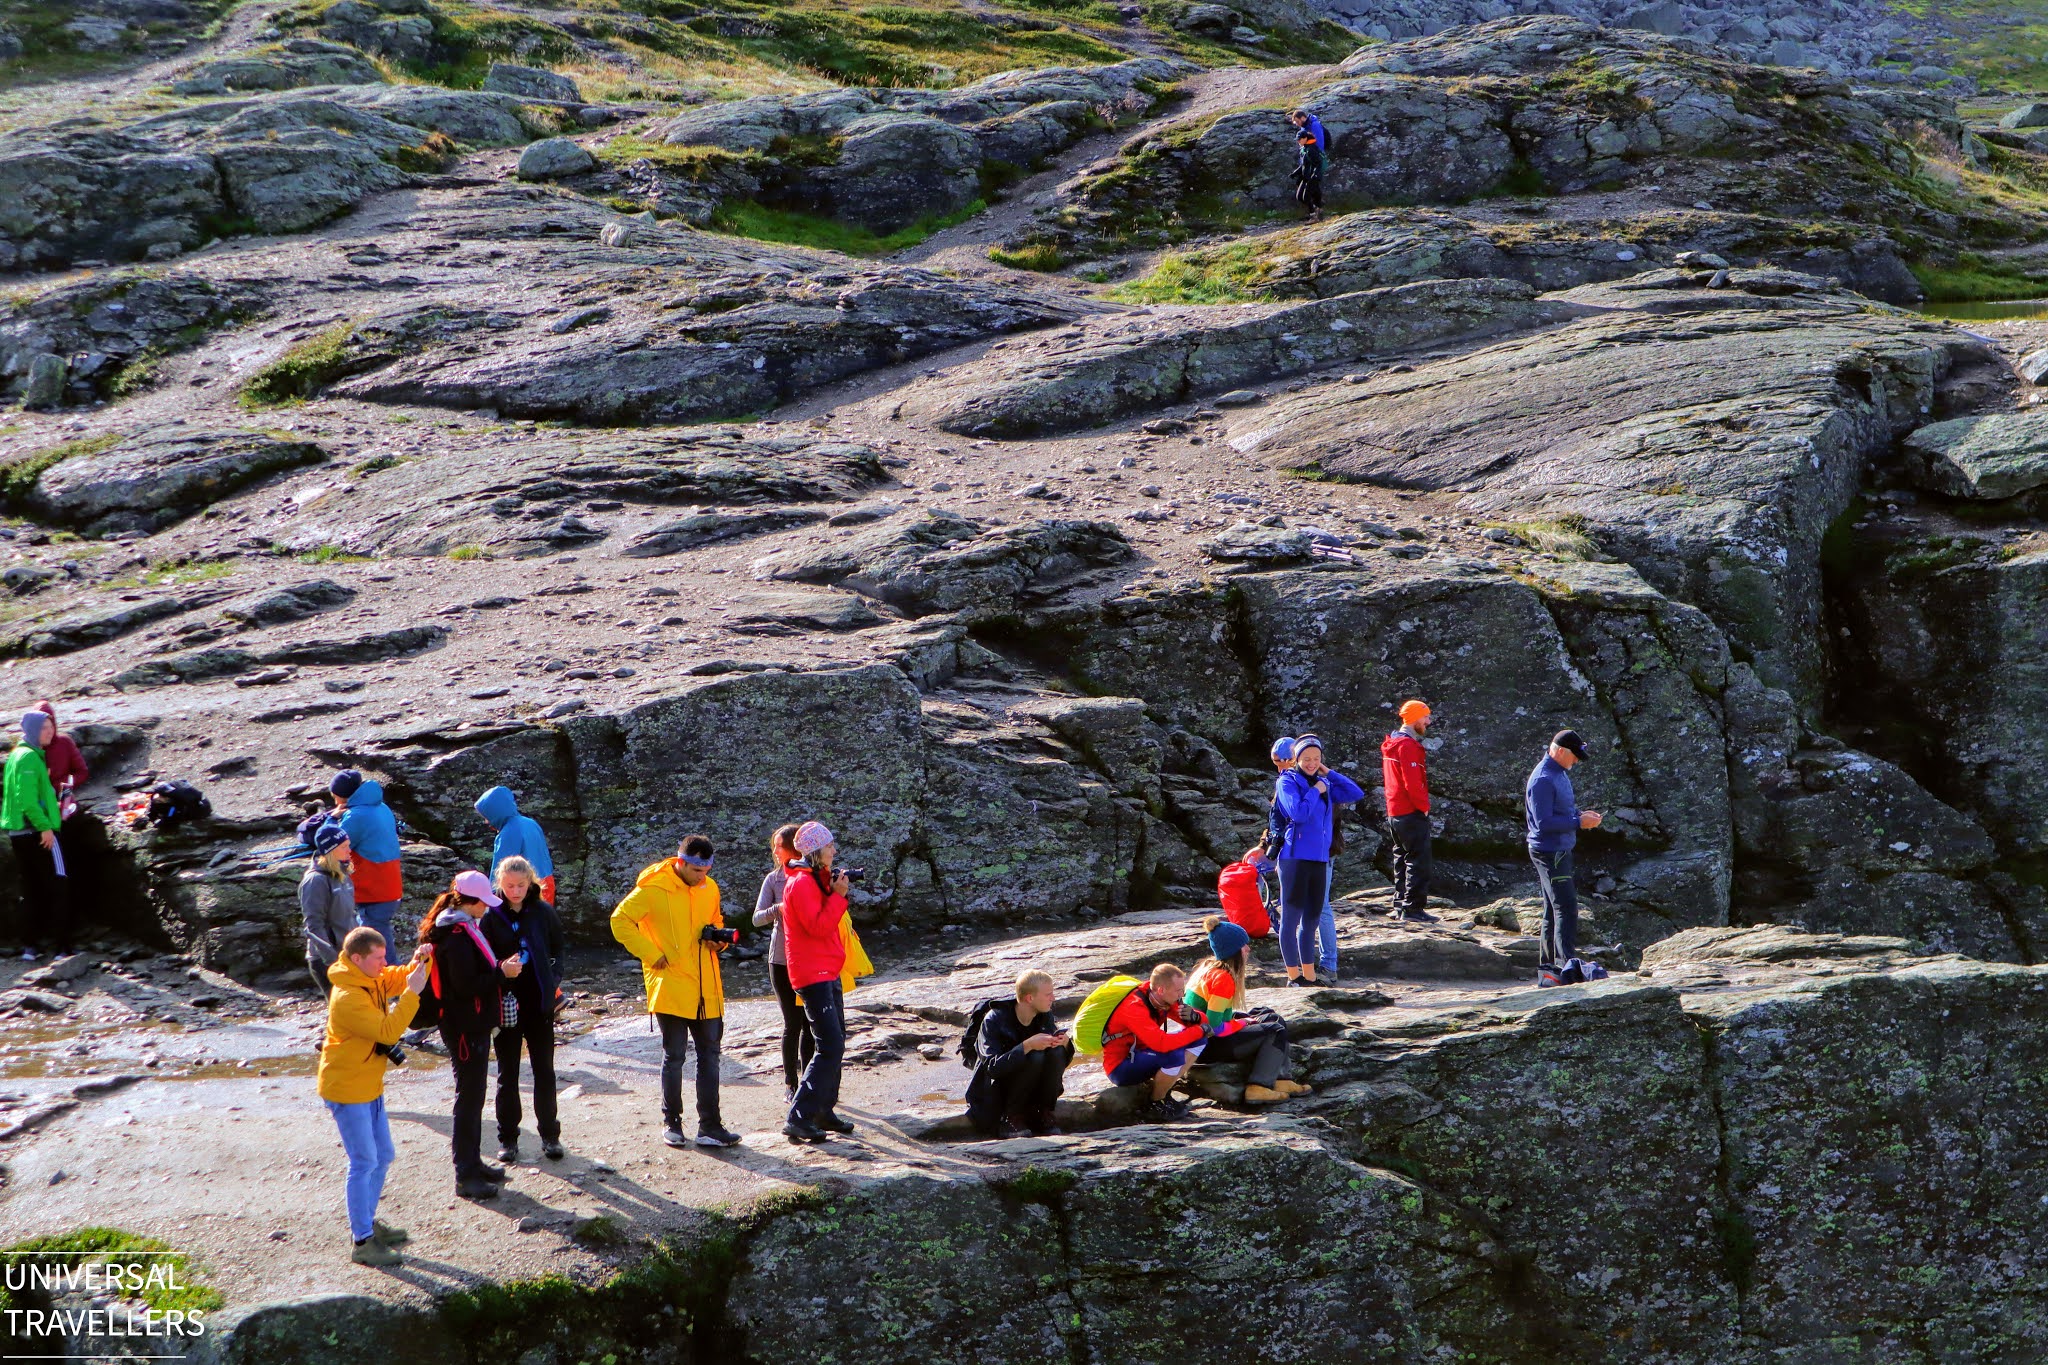 Hikers have gathered to take pictures of the Trolltunga Cliff along with the Lake Ringedalsvatnet